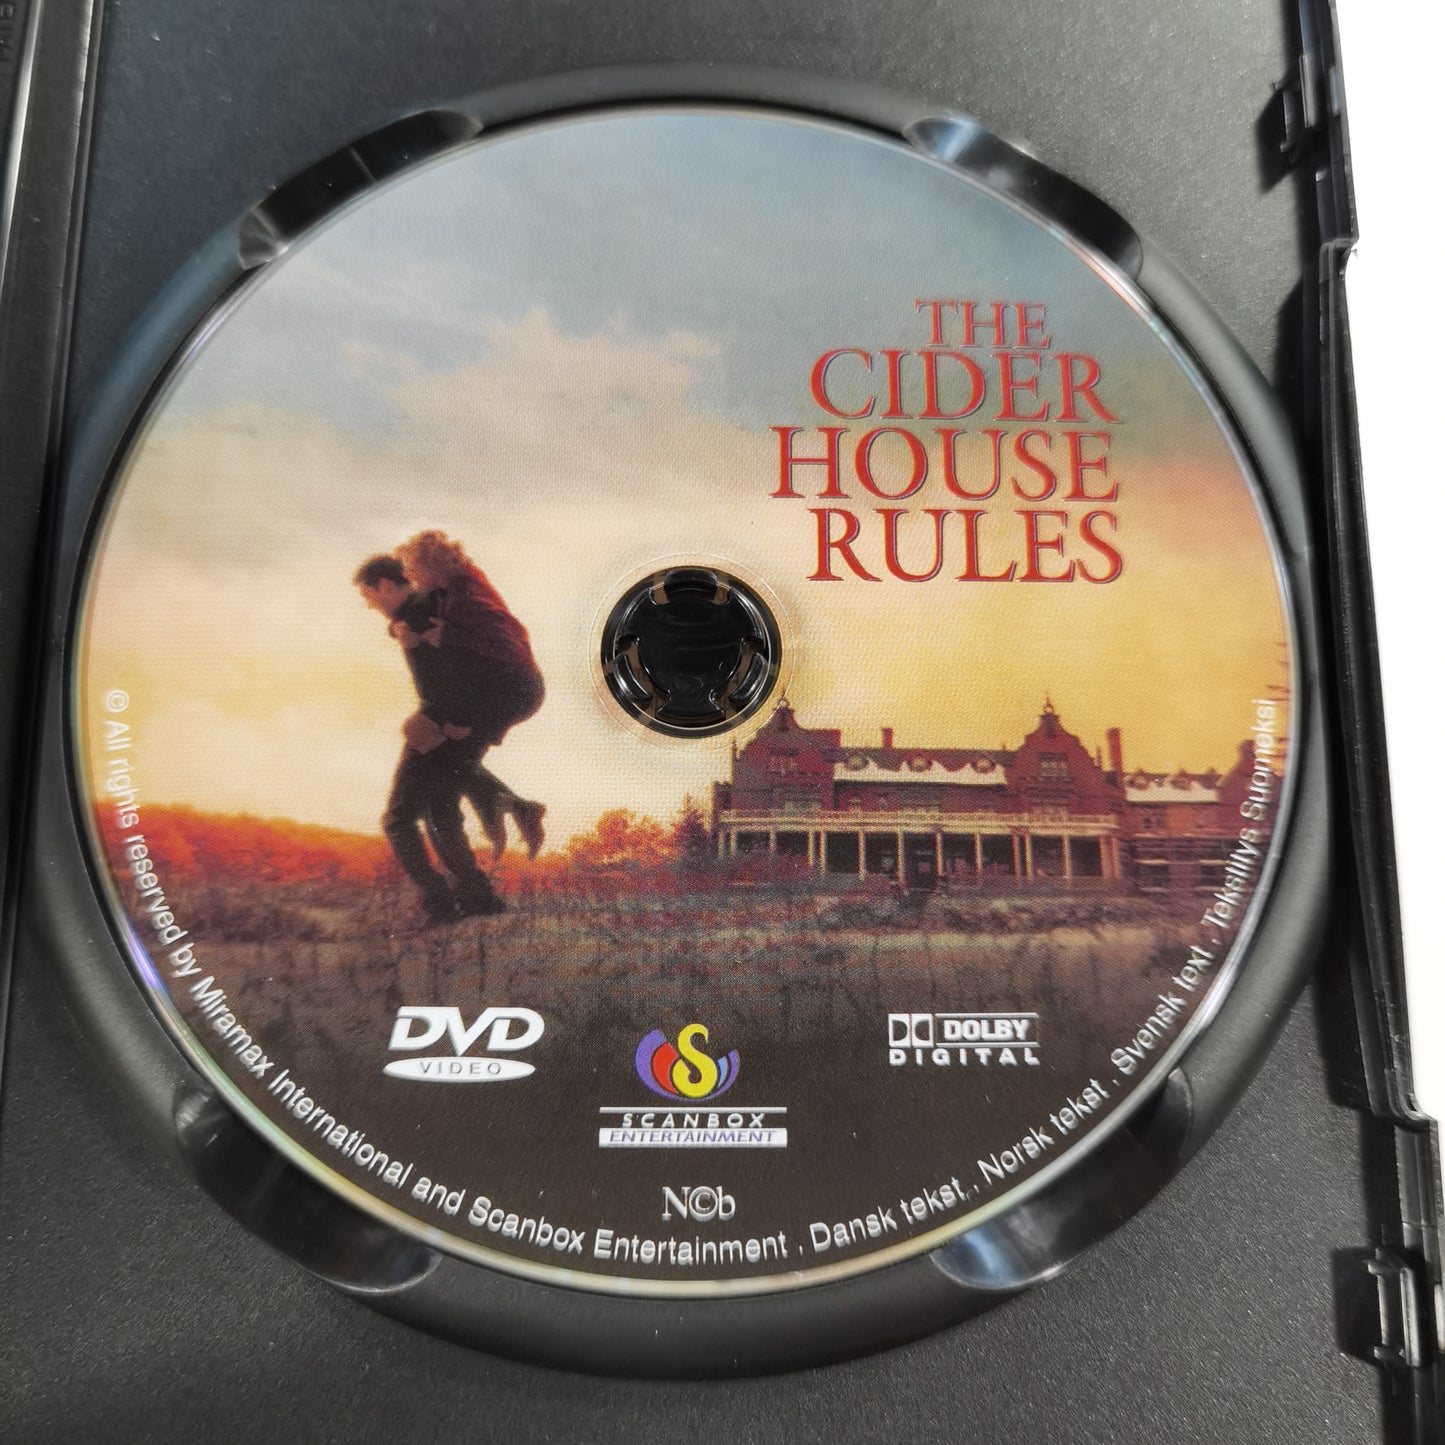 The Cider House Rules (1999) - DVD DK NO SE FI Global Video